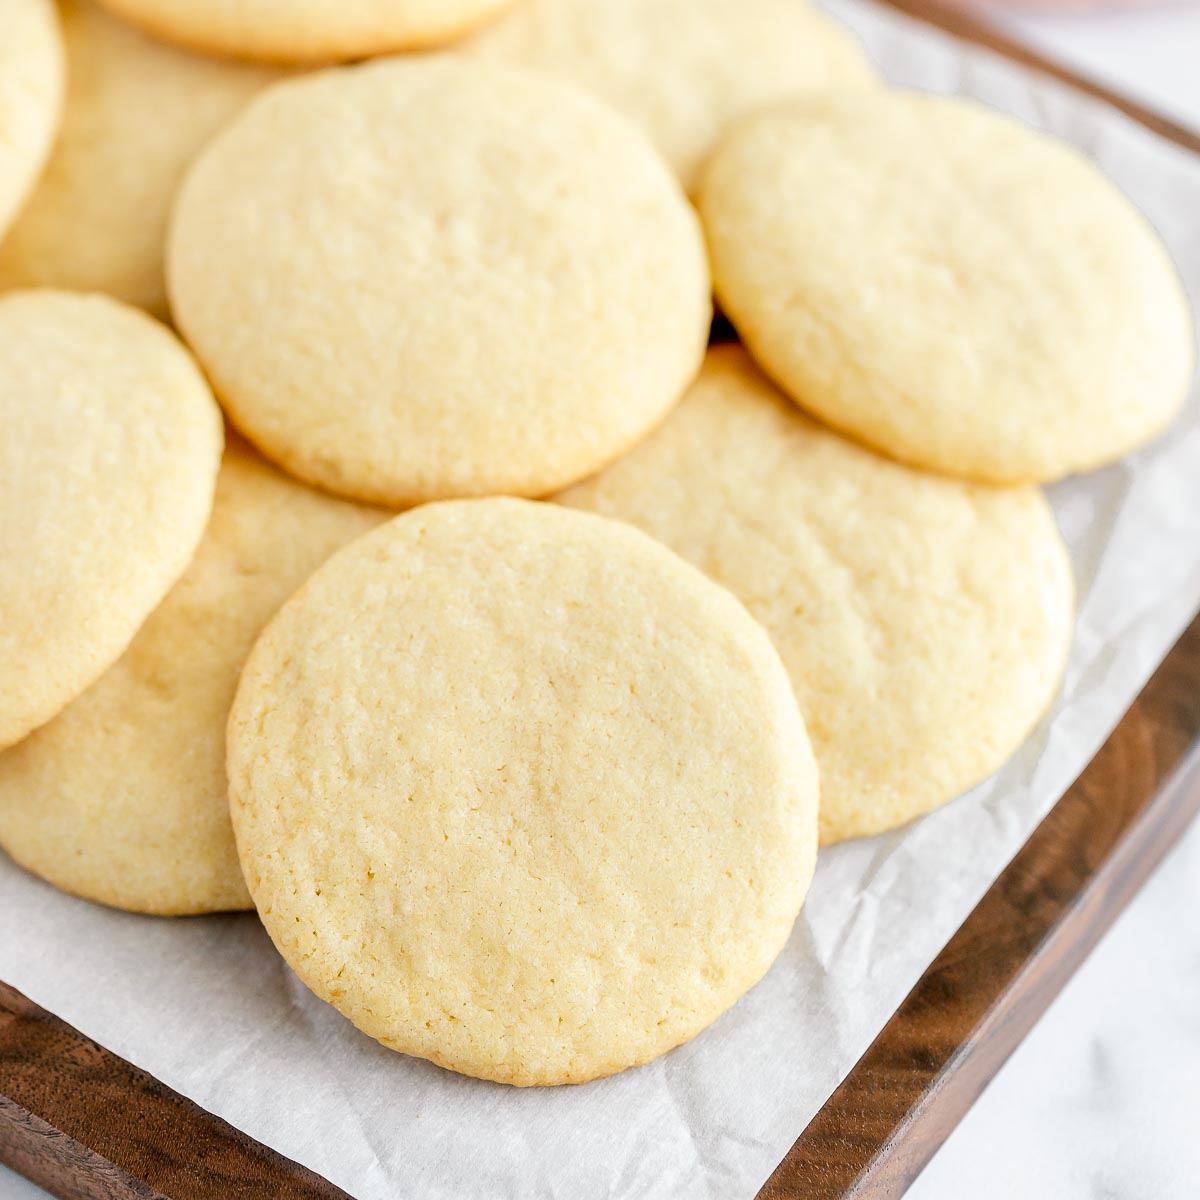 How to Make Good Sugar Cookie Recipes